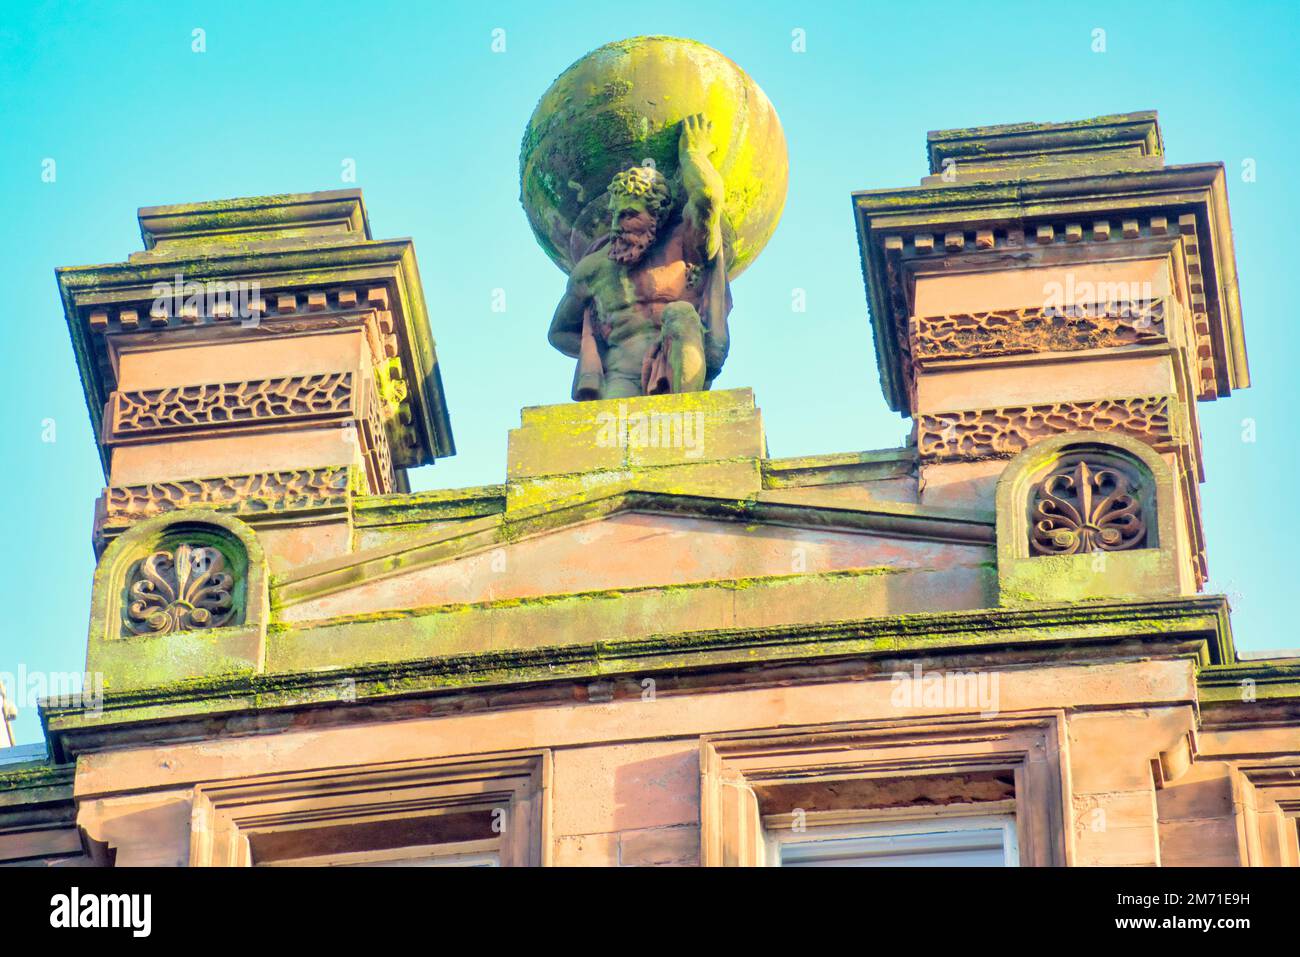 Atlas, statue on Red sandstone building on Hope Street, Glasgow, Cortland, James Charles Young (1839–1923) (attributed to) Stock Photo